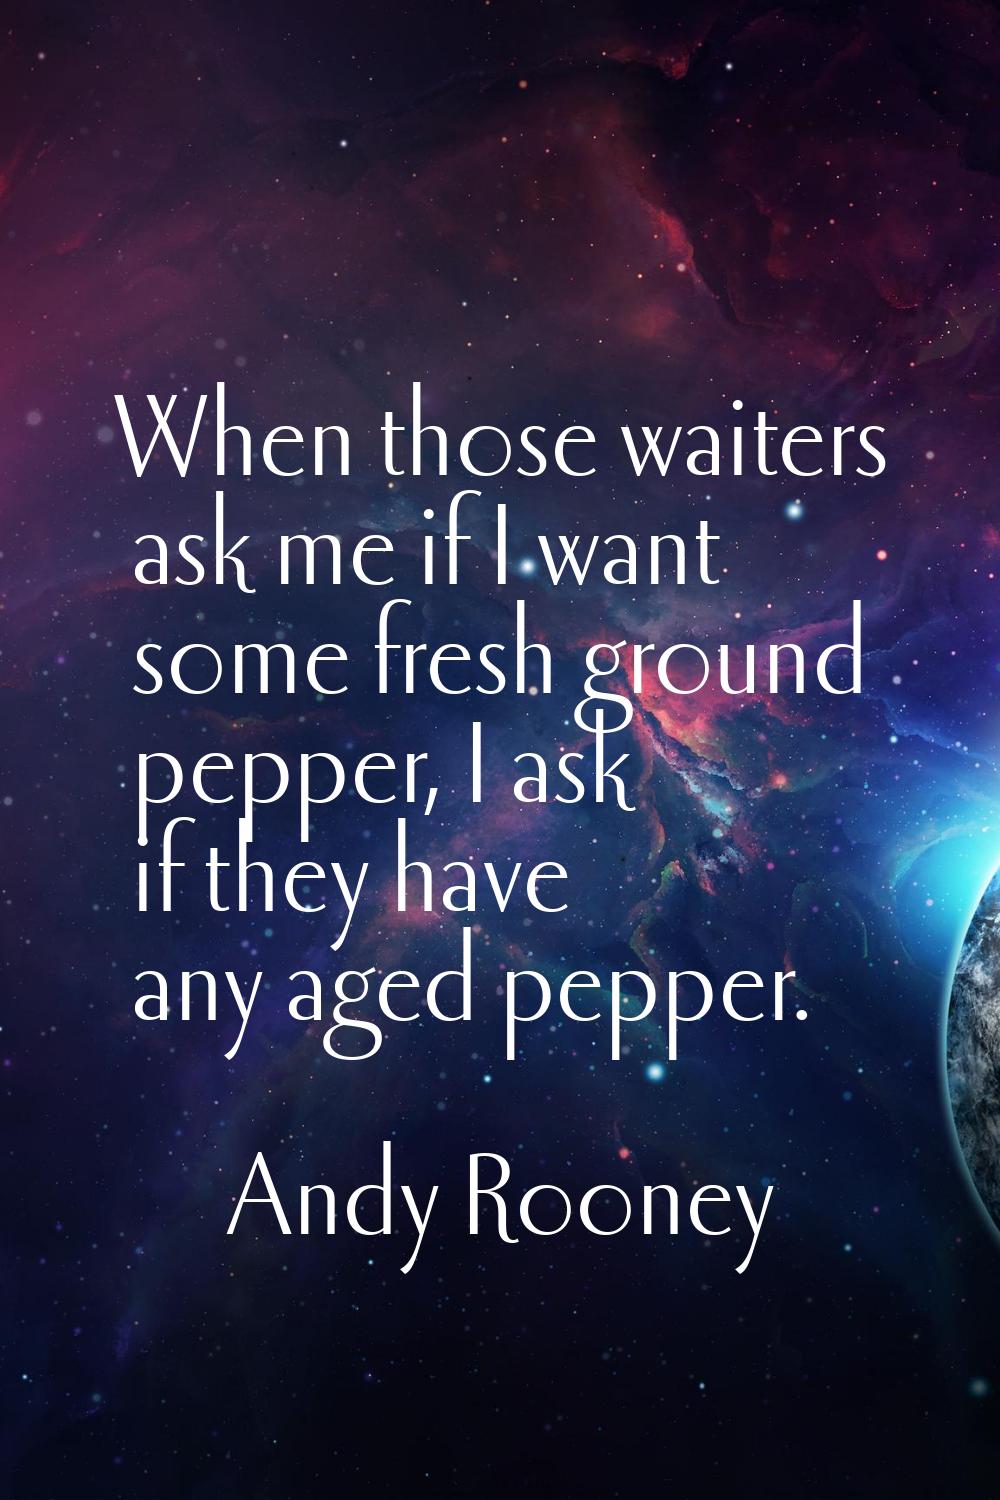 When those waiters ask me if I want some fresh ground pepper, I ask if they have any aged pepper.